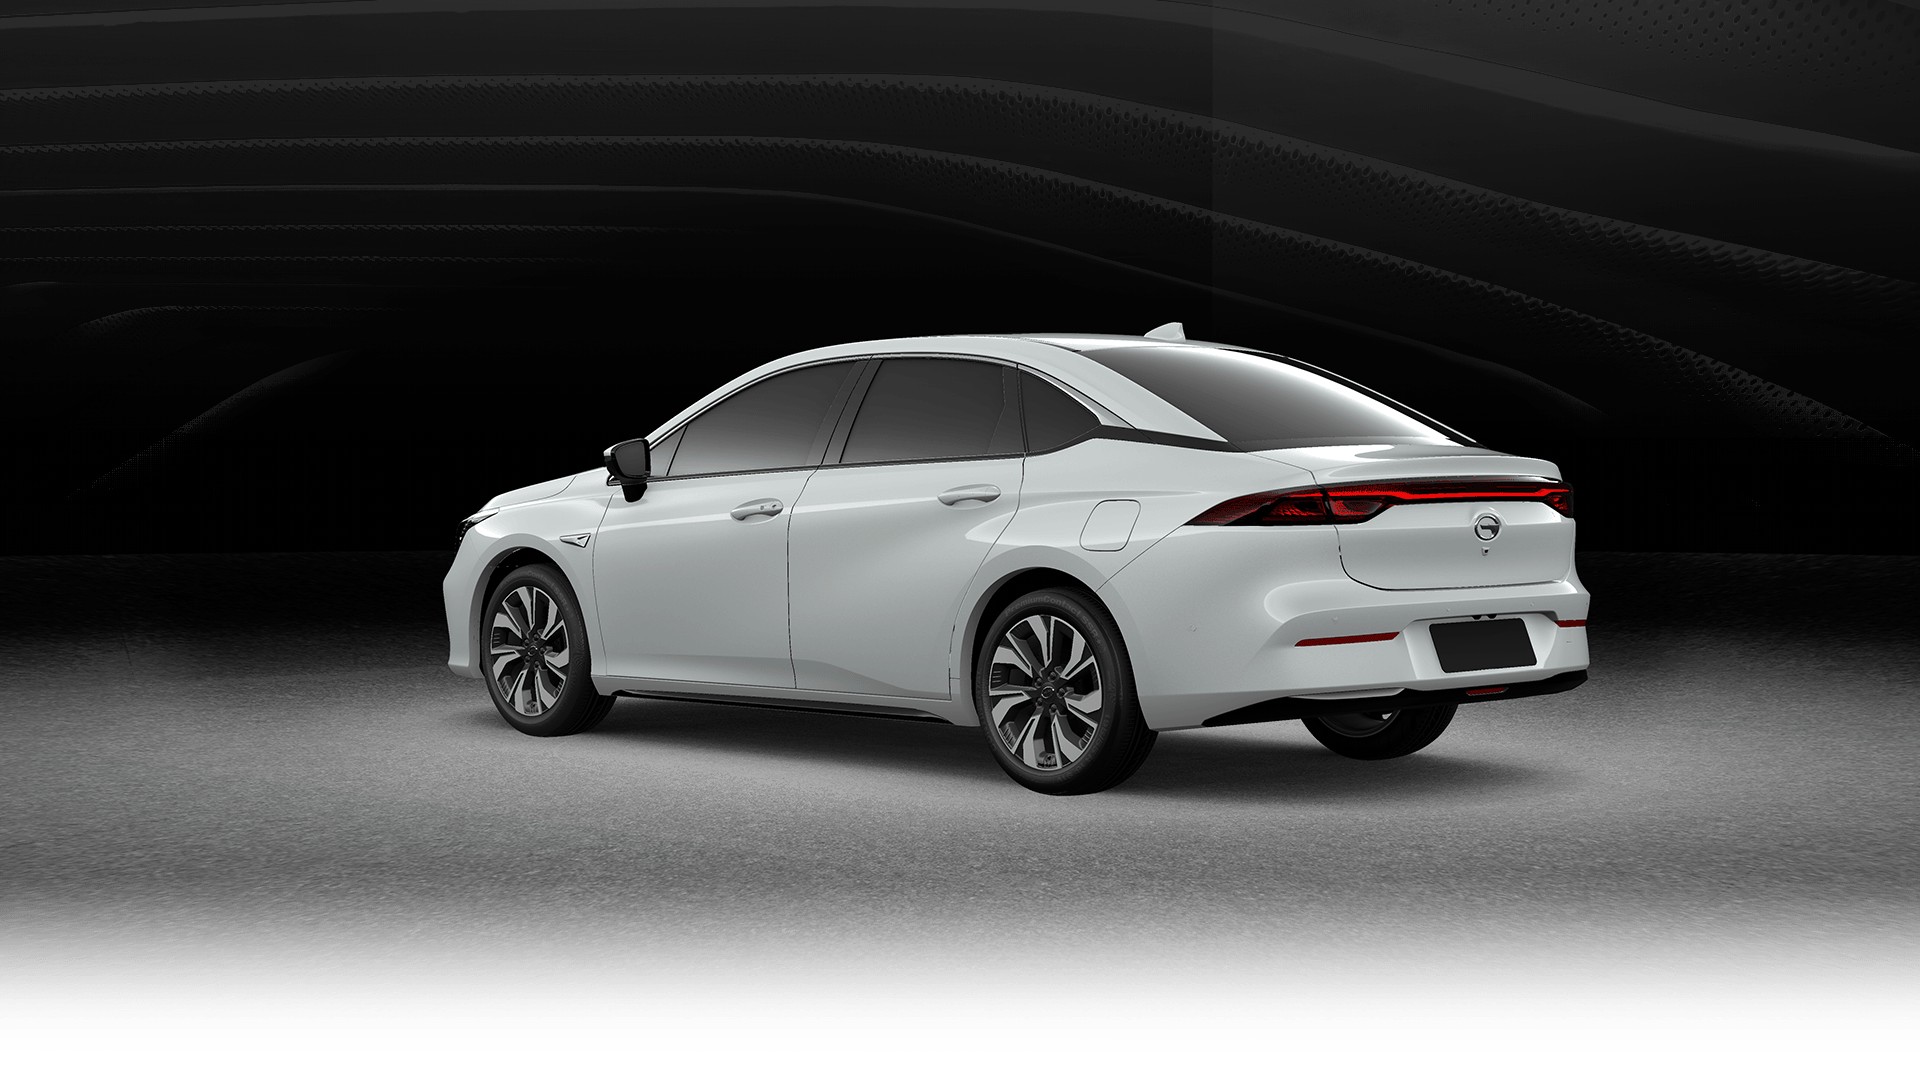 GAC Aims To Battle Tesla With Its New Aion S Electric Vehicle